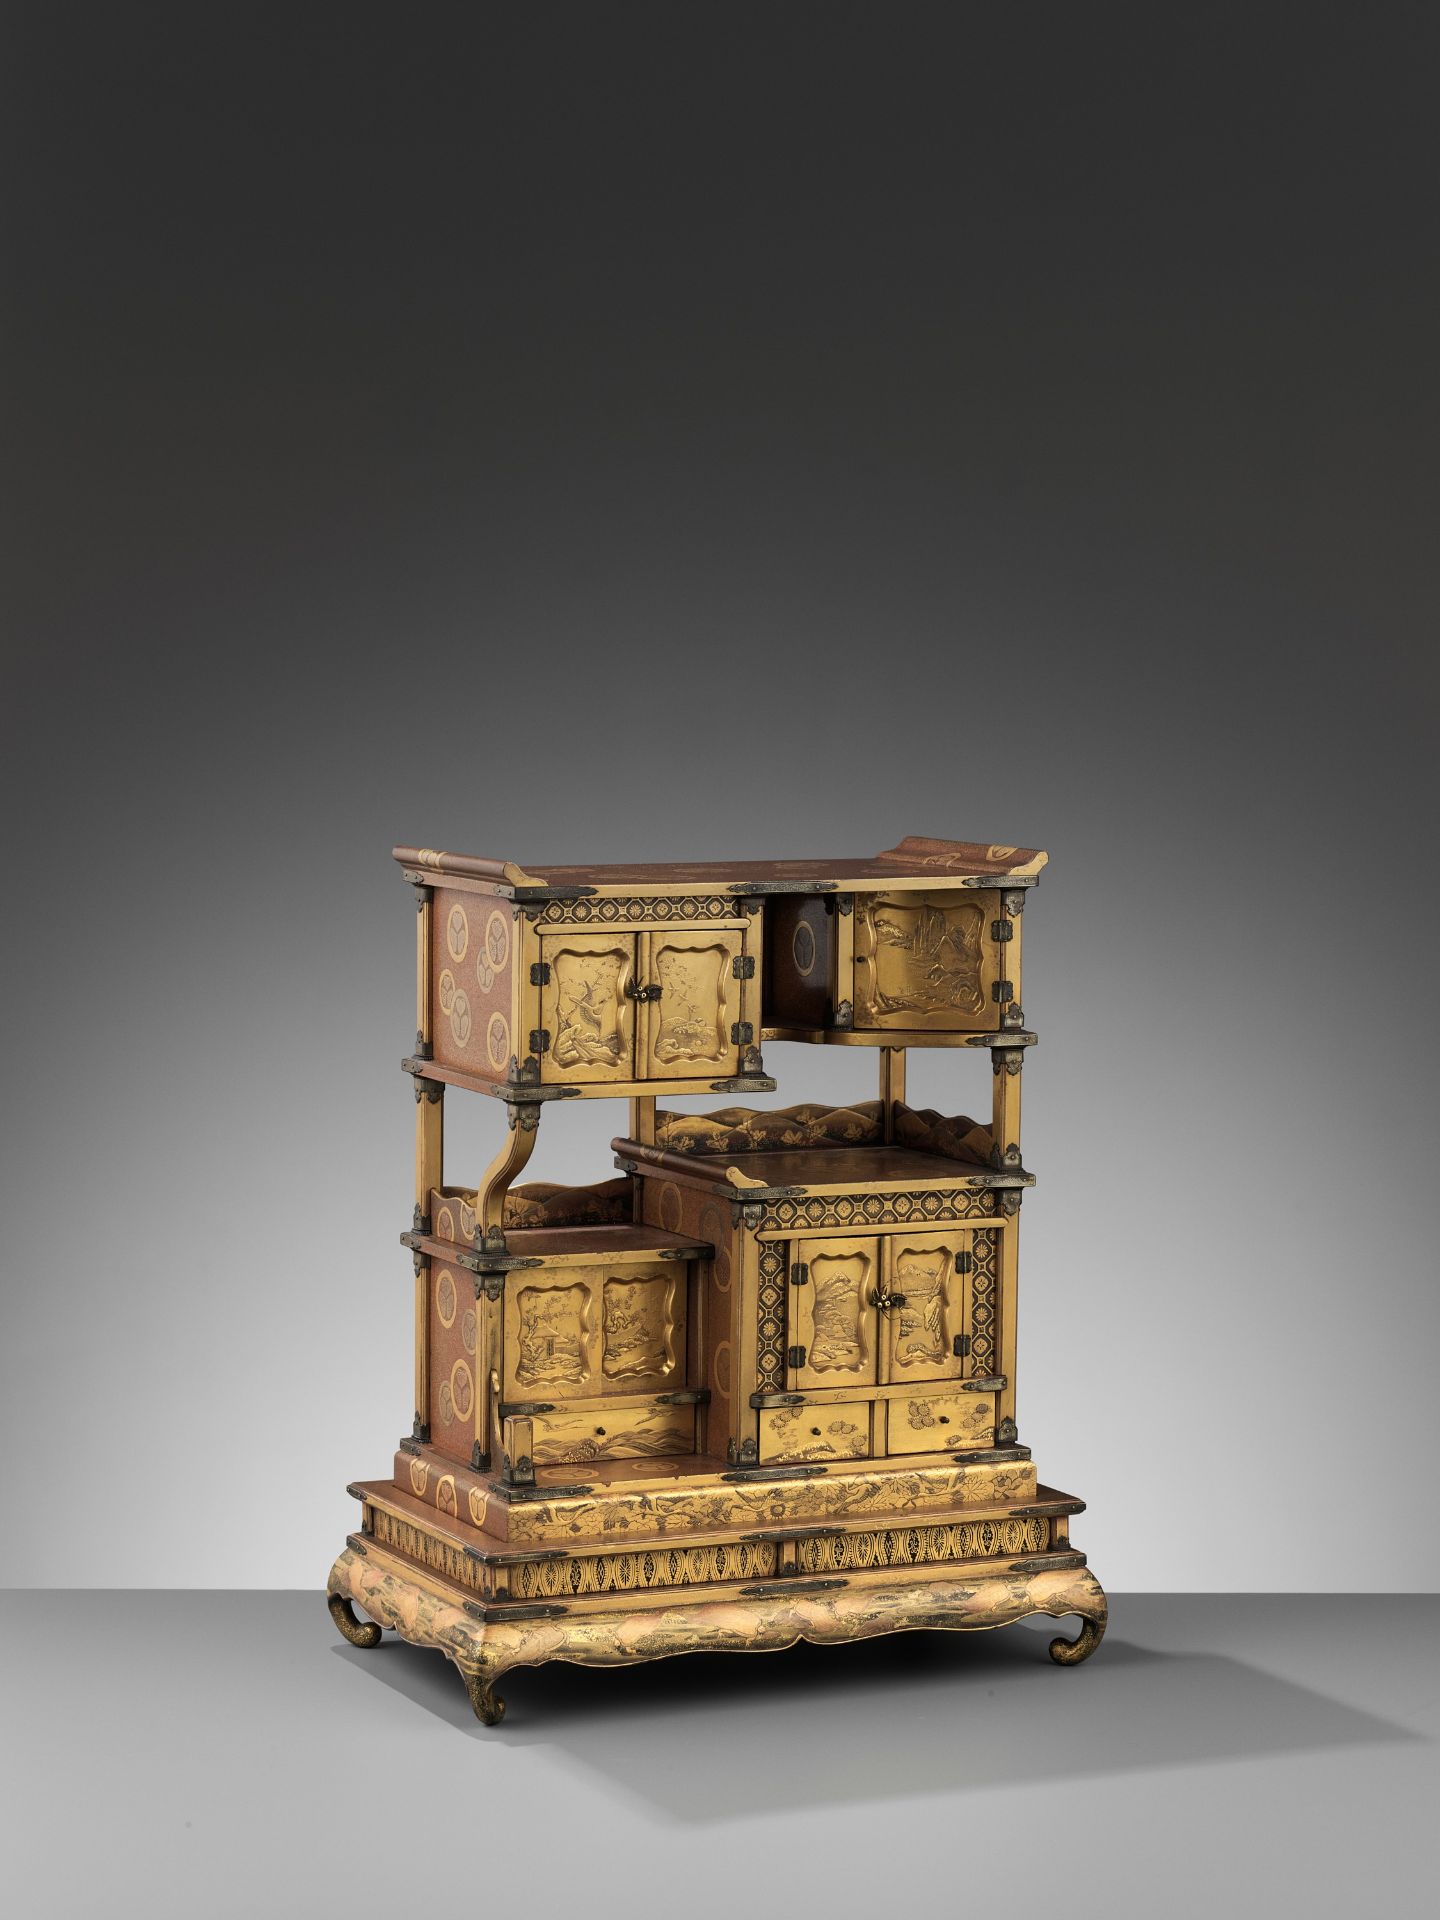 A SUPERB AND RARE SMALL GOLD-LACQUER SHODANA (DISPLAY CABINET) WITH STAND - Image 15 of 18